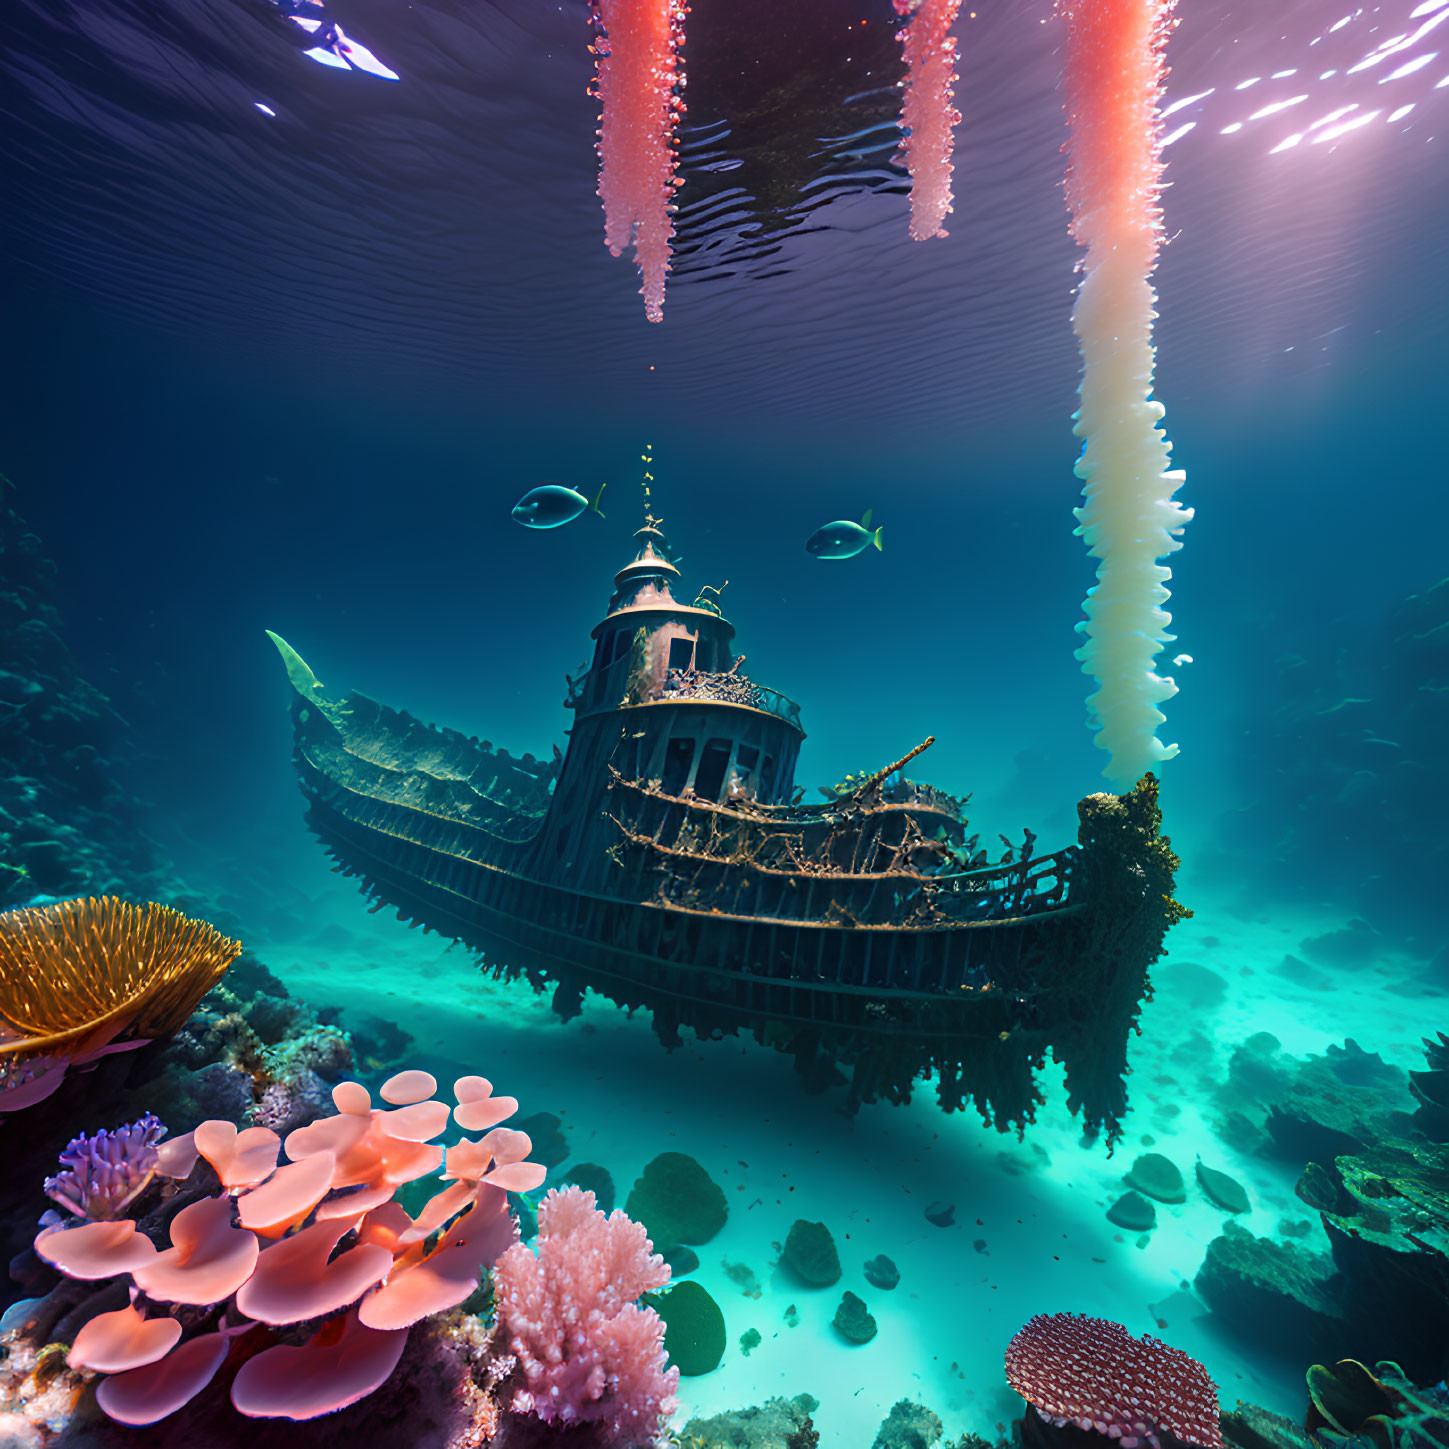 Sunken ship surrounded by coral reefs and mystical jellyfish in underwater scene